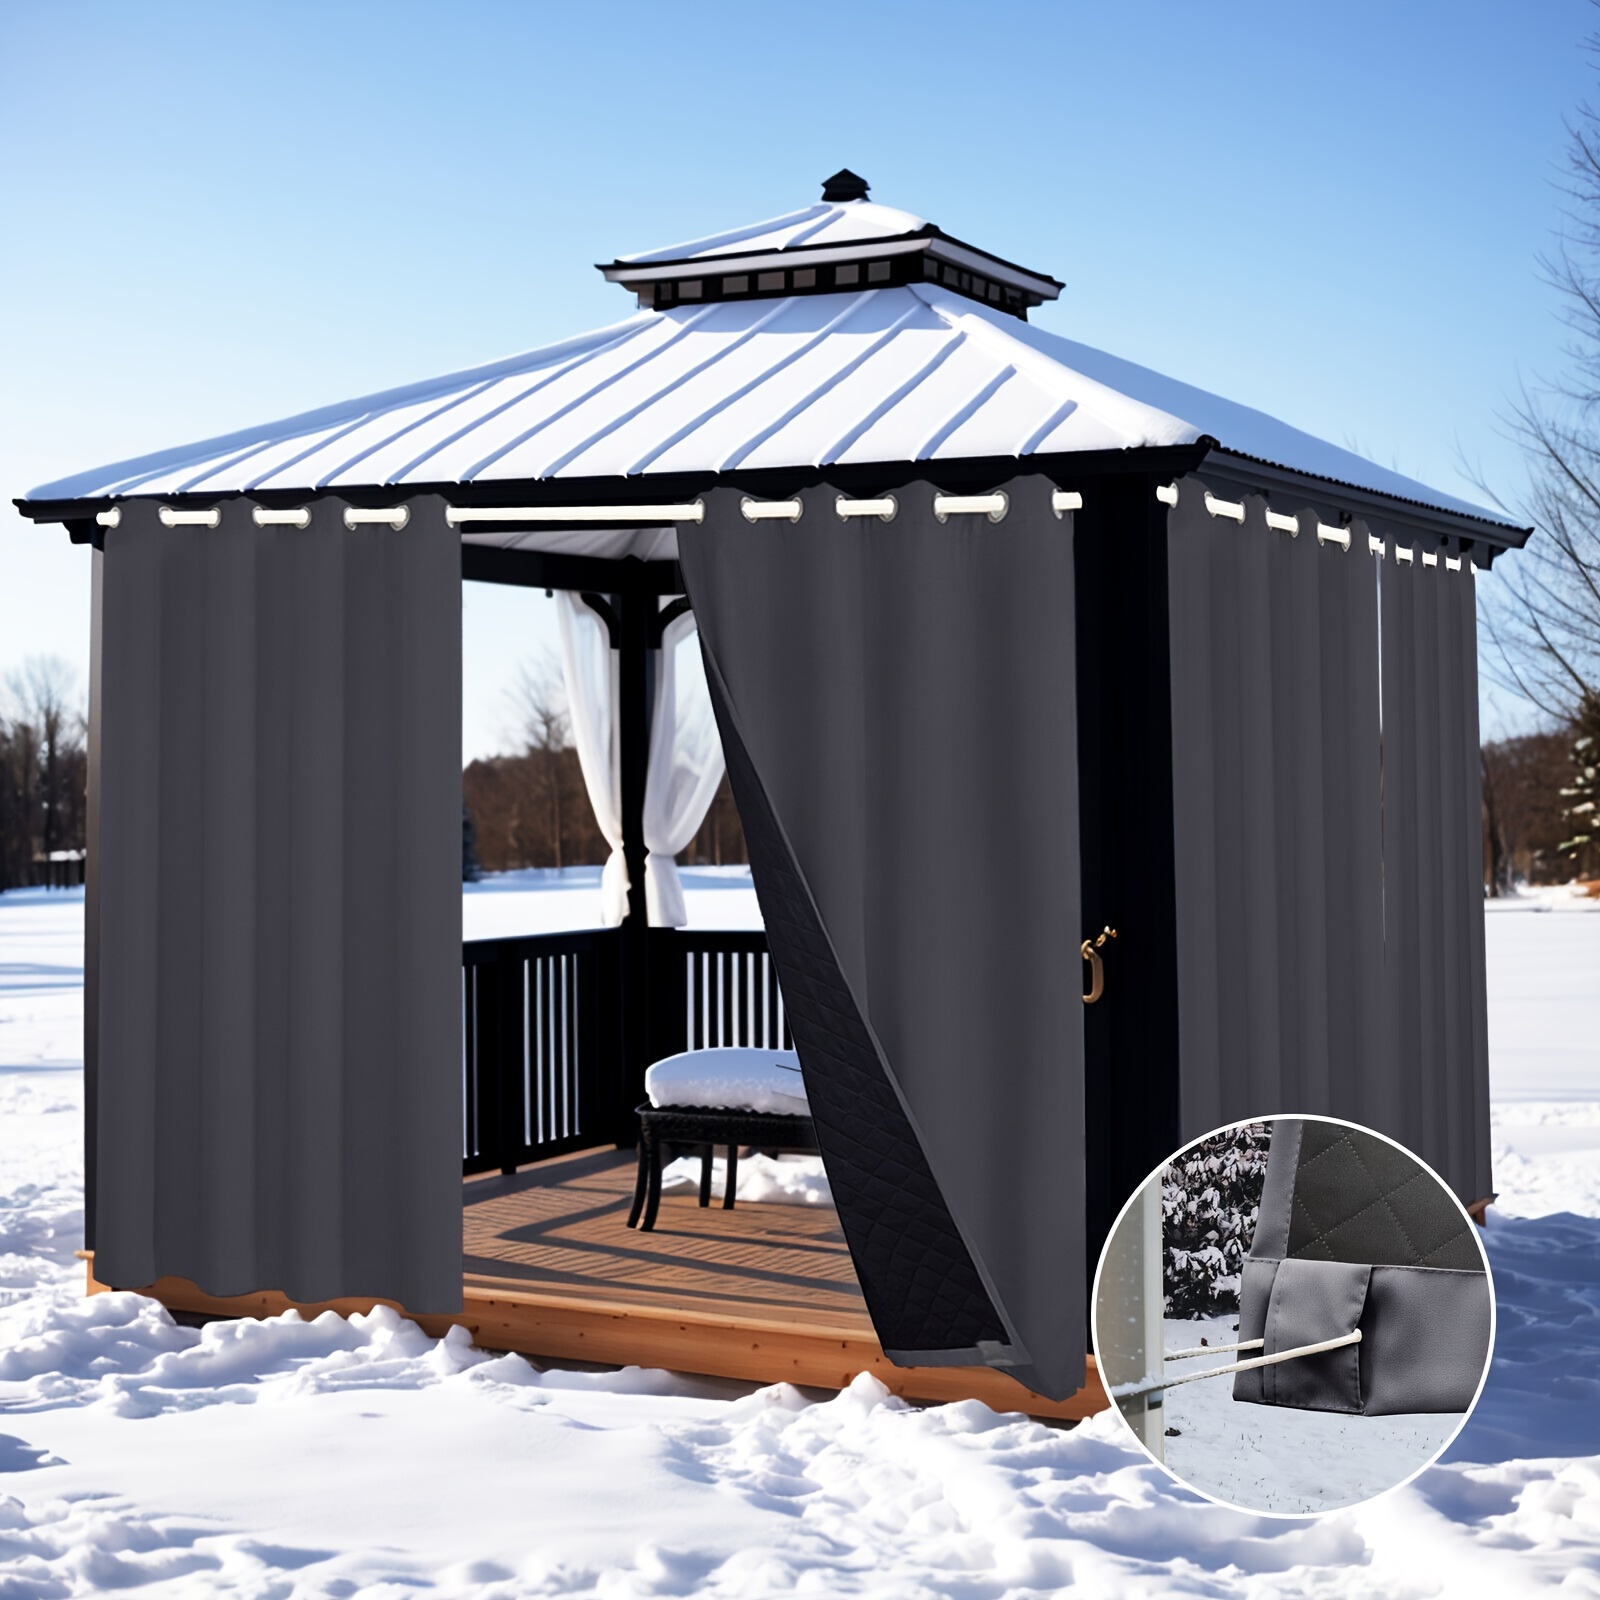 

Experience The Ultimate In Privacy With Outdoor Blackout Waterproof Thick Curtains - Trendsetting Quilted Thermal Drapes With Effortless Eyelets - Enhance Your Outdoor Living